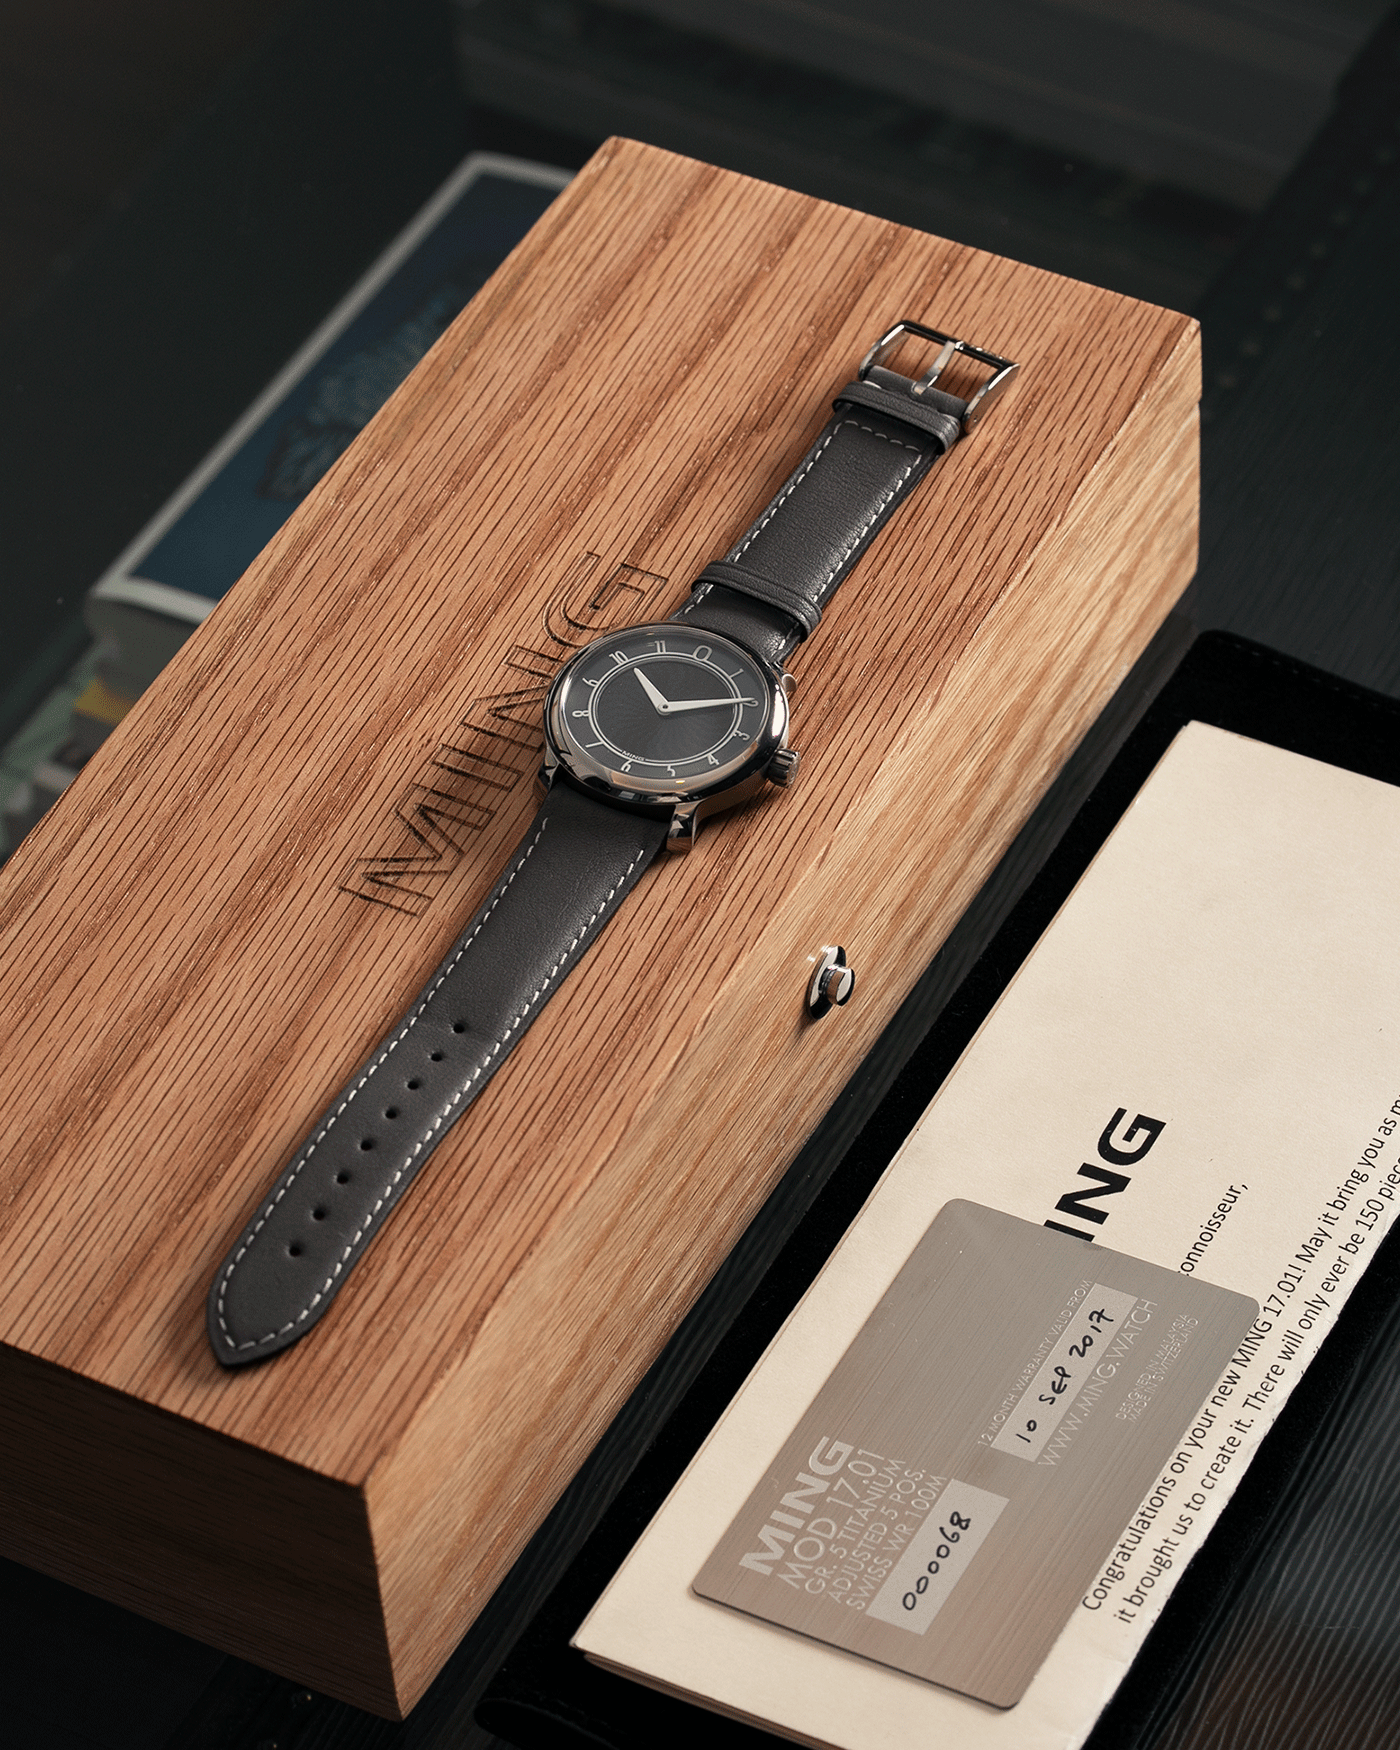 Brand: Ming Year: 2017 Model: 17.01 Material: Grade 5 Titanium Movement: Hand-winding mechanical movement Sellita SW210-1 Case Diameter: 38mm Strap: Jean Rousseau Grey Smooth Calf for MING